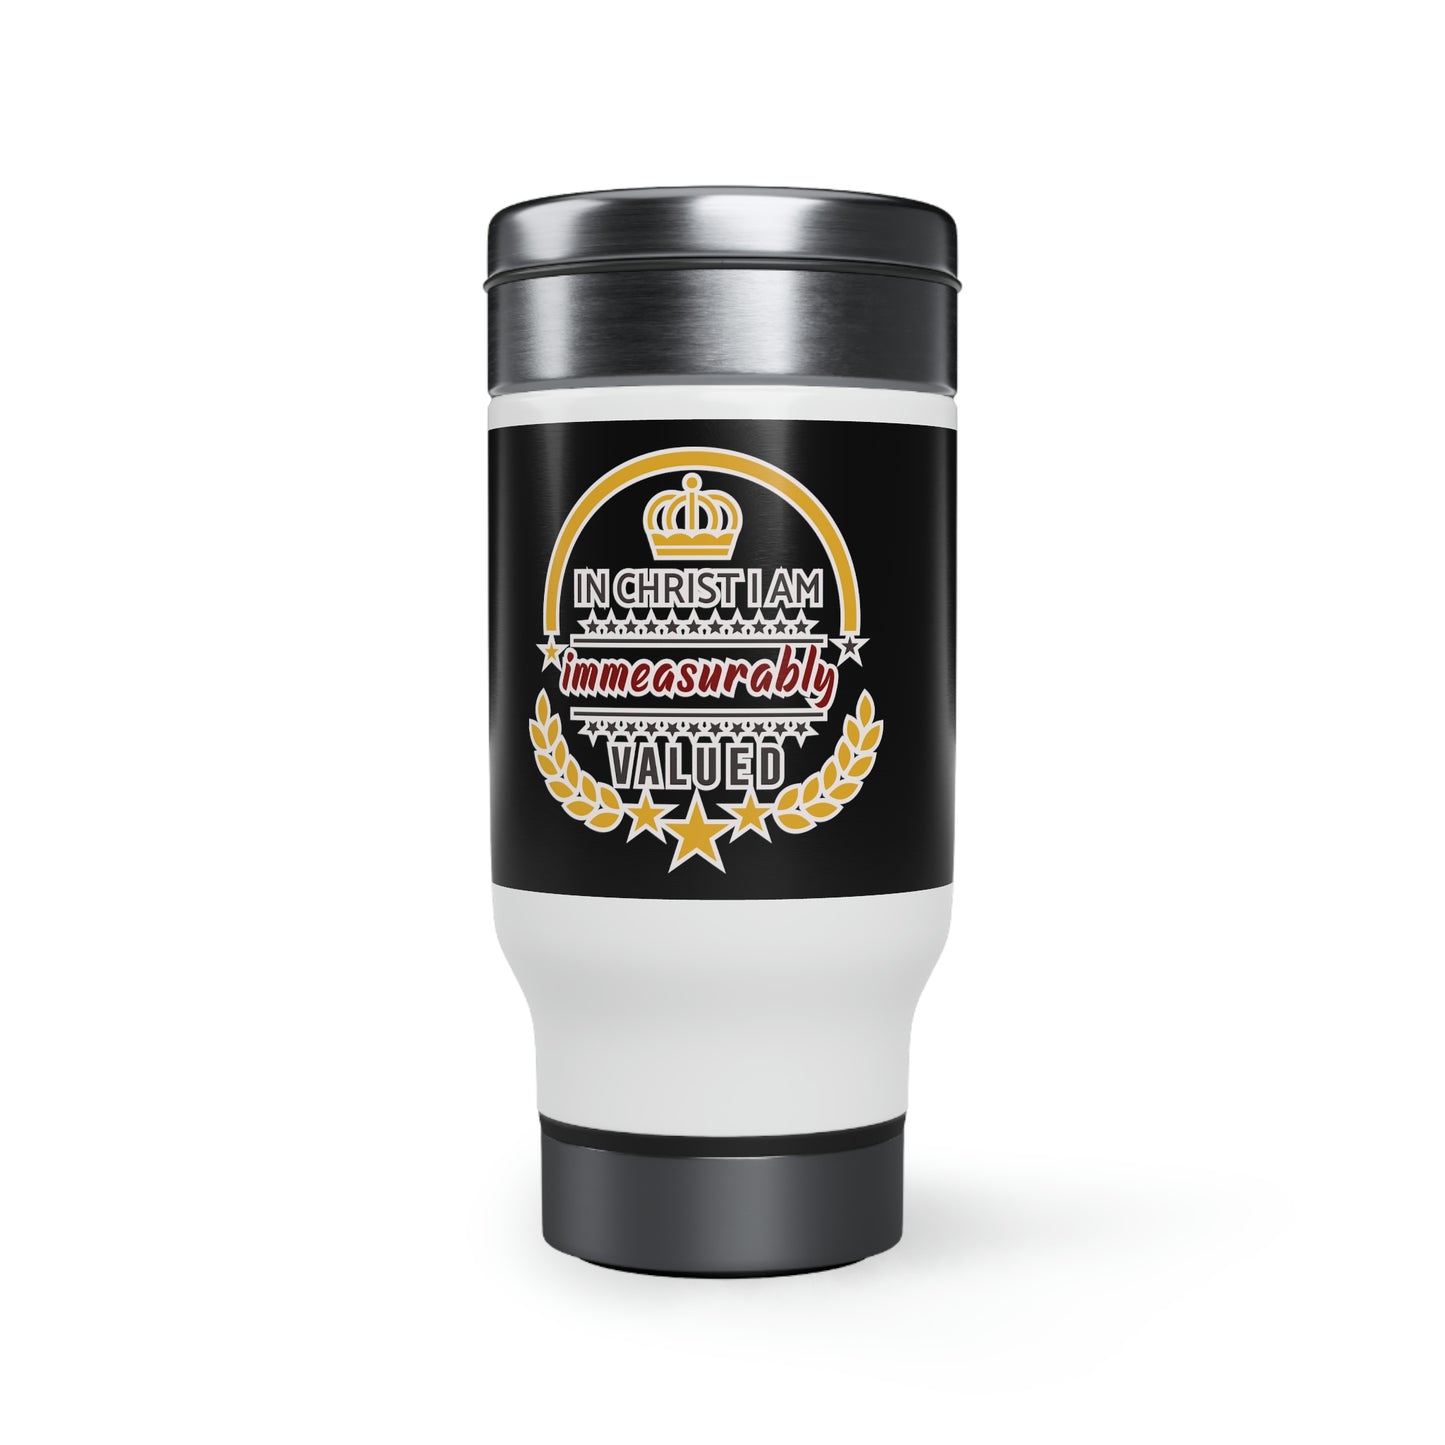 In Christ I Am Immeasurably Valued Travel Mug with Handle, 14oz